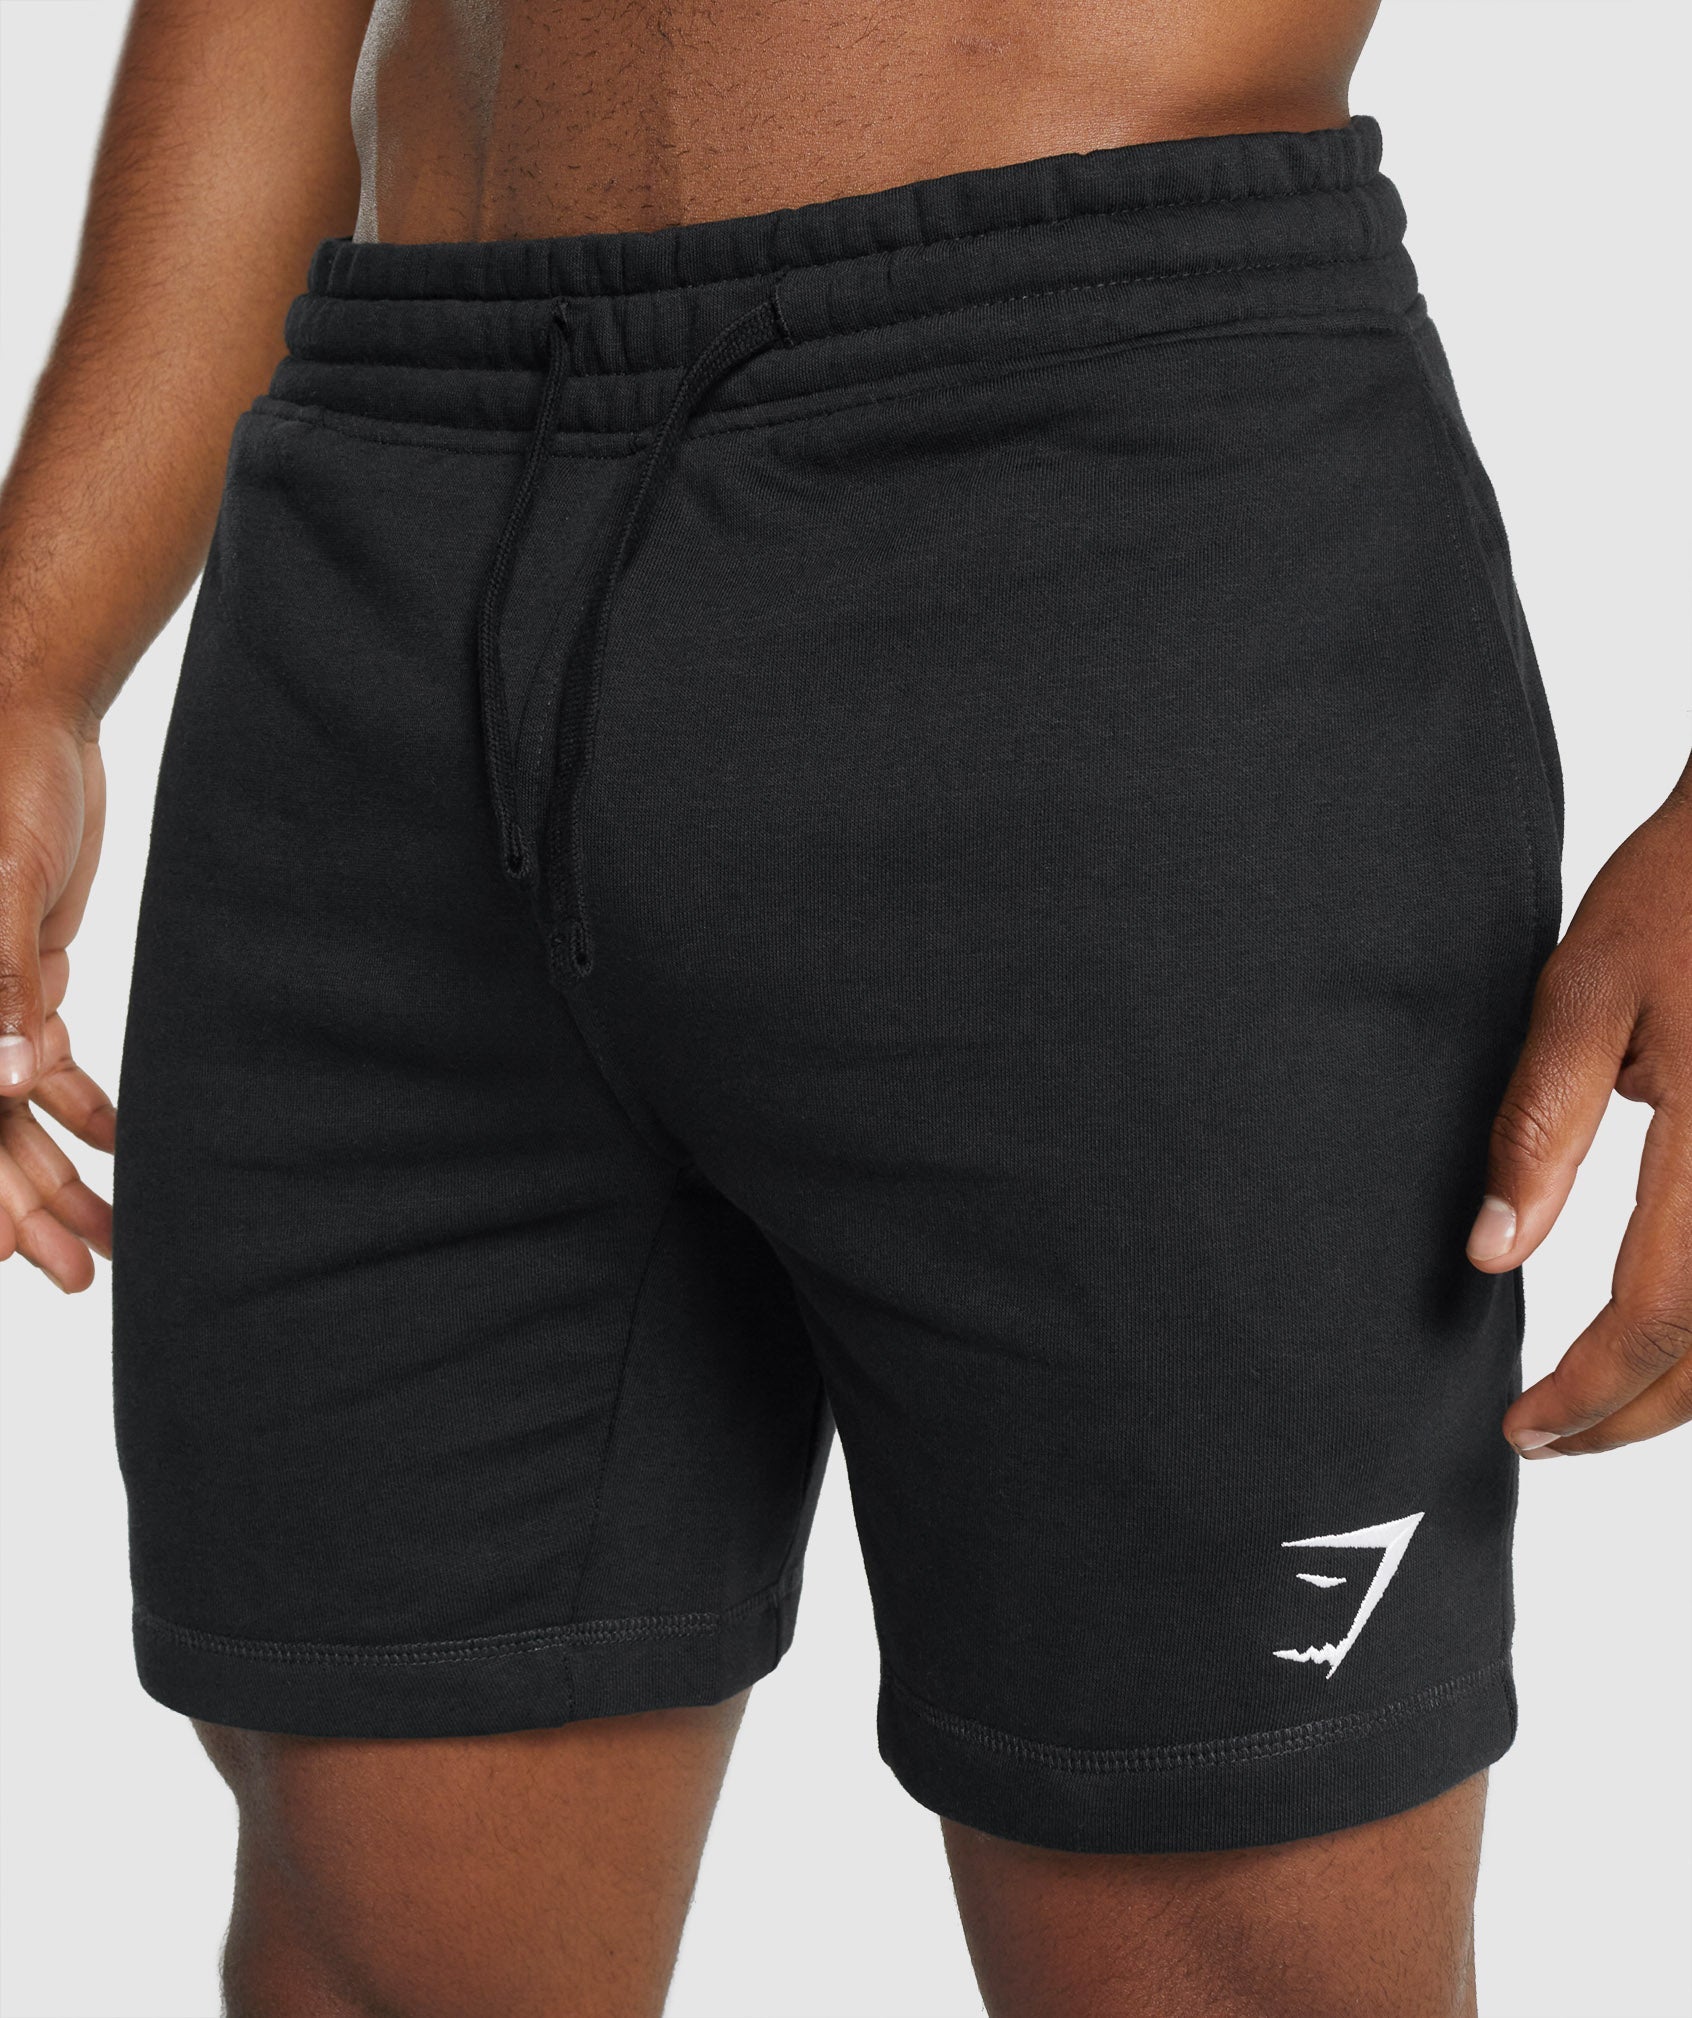 Crest Shorts in Black - view 6